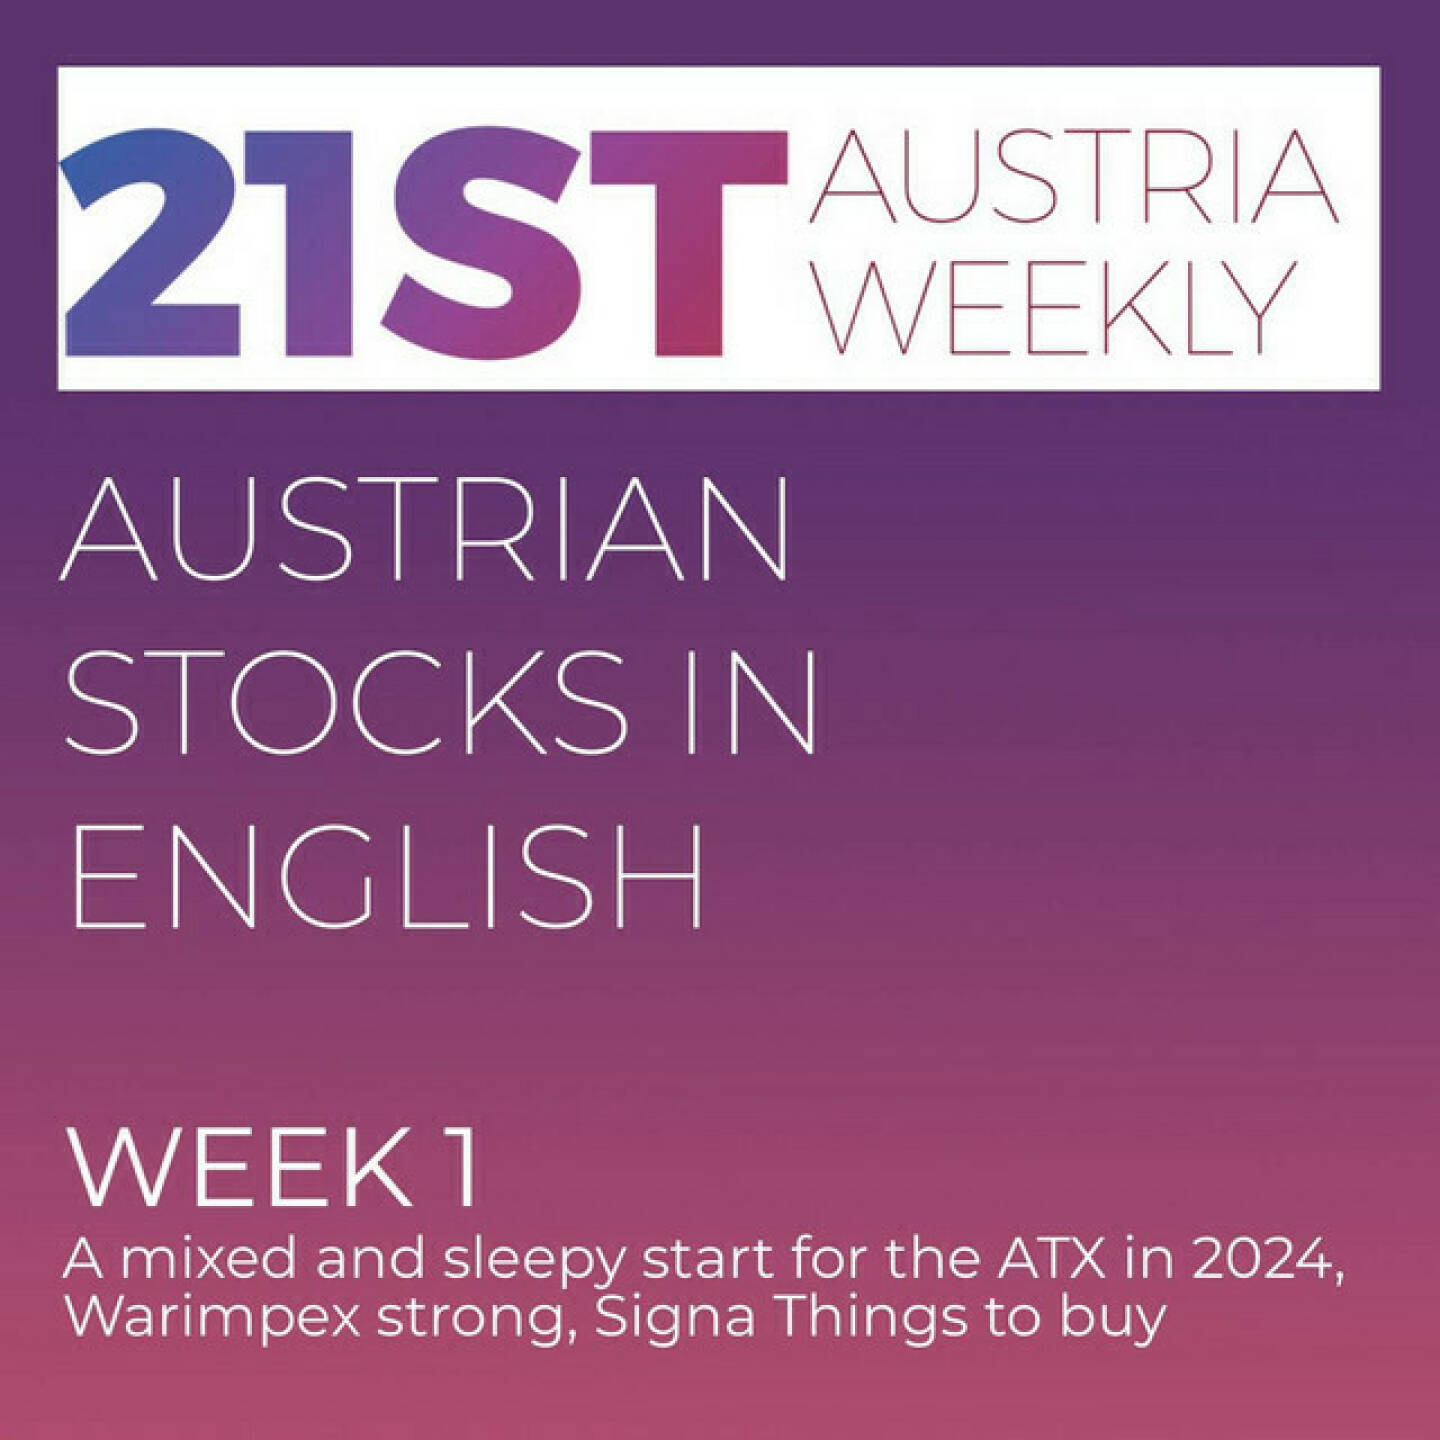 https://open.spotify.com/episode/1pt5zcosv9E2WH8BExFKdr
Austrian Stocks in English: A mixed and sleepy start for the ATX in 2024, Warimpex strong, Signa Things to buy - <p>Welcome to &#34;Austrian Stocks in English - presented by Palfinger&#34;, the english spoken weekly Summary for the Austrian Stock Market,  positioned every Sunday in the mostly german languaged Podcast &#34;Audio-CD.at Indie Podcasts&#34;- Wiener Börse, Sport Musik und Mehr“ . <br/><br/>The following script is based on our 21st Austria weekly. ATX TR started in week one with 4 trading days with a 2:2, but bottom line slightly lower. Gainers came with Warimpex, UBM und Polytec from the 2nd Row and News came from SBO, OMV Petrom, Vienna Airport, Kapsch TrafficCom and Signa, spoken by Alison.<br/><br/><a href=https://boerse-social.com/21staustria target=_blank>https://boerse-social.com/21staustria</a><br/><br/><a href=https://www.audio-cd.at/search/austrian%20stocks%20in%20english target=_blank>https://www.audio-cd.at/search/austrian%20stocks%20in%20english</a><br/><br/>30x30 Finanzwissen pur für Österreich auf Spotify spoken by Alison:: <a href=https://open.spotify.com/playlist/3MfSMoCXAJMdQGwjpjgmLm target=_blank>https://open.spotify.com/playlist/3MfSMoCXAJMdQGwjpjgmLm</a><br/><br/>Please rate my Podcast on Apple Podcasts (or Spotify): <a href=https://podcasts.apple.com/at/podcast/audio-cd-at-indie-podcasts-wiener-boerse-sport-musik-und-mehr/id1484919130 target=_blank>https://podcasts.apple.com/at/podcast/audio-cd-at-indie-podcasts-wiener-boerse-sport-musik-und-mehr/id1484919130</a> .And please spread the word : <a href=https://www.boerse-social.com/21staustria target=_blank>https://www.boerse-social.com/21staustria</a> - the address to subscribe to the weekly summary as a PDF.</p>